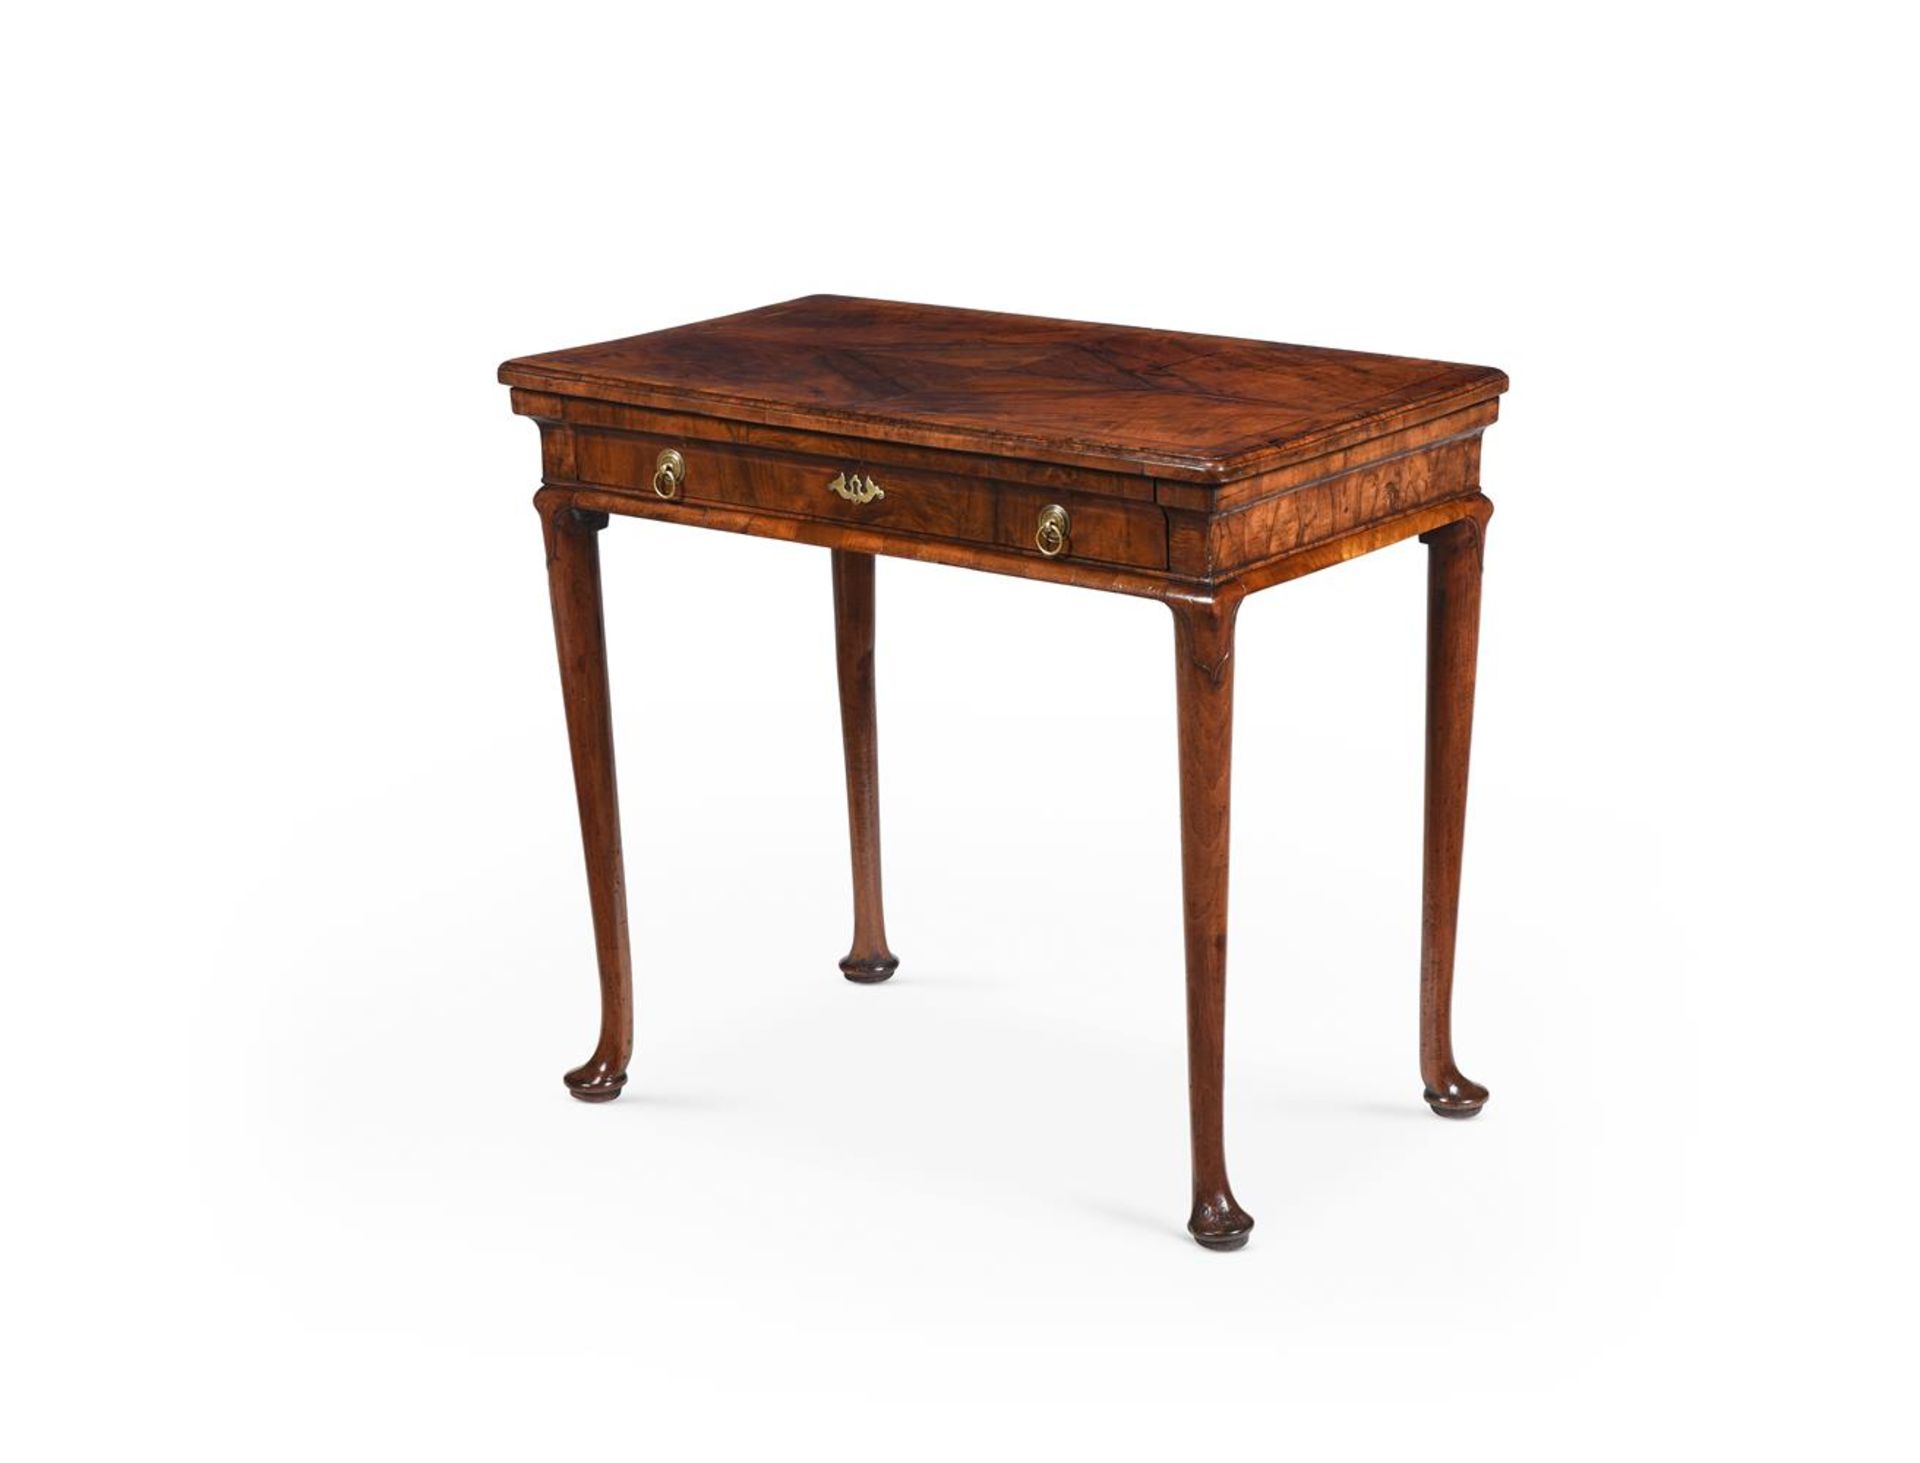 A FINE QUEEN ANNE FIGURED WALNUT SIDE TABLE, CIRCA 1710 - Image 2 of 5